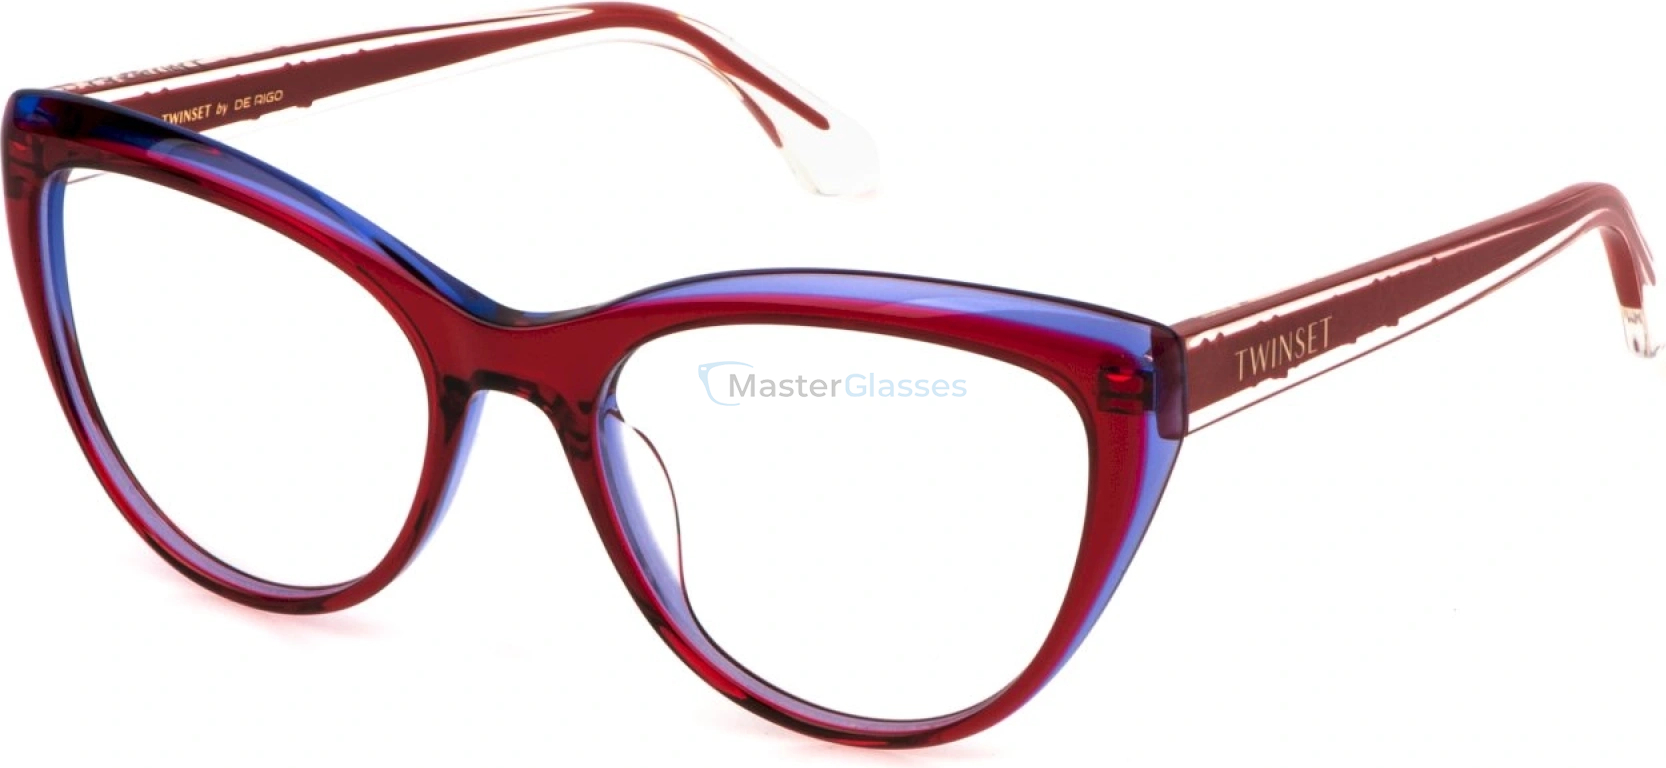  TWINSET VTW046 6A4,  VIOLET+RED, CLEAR